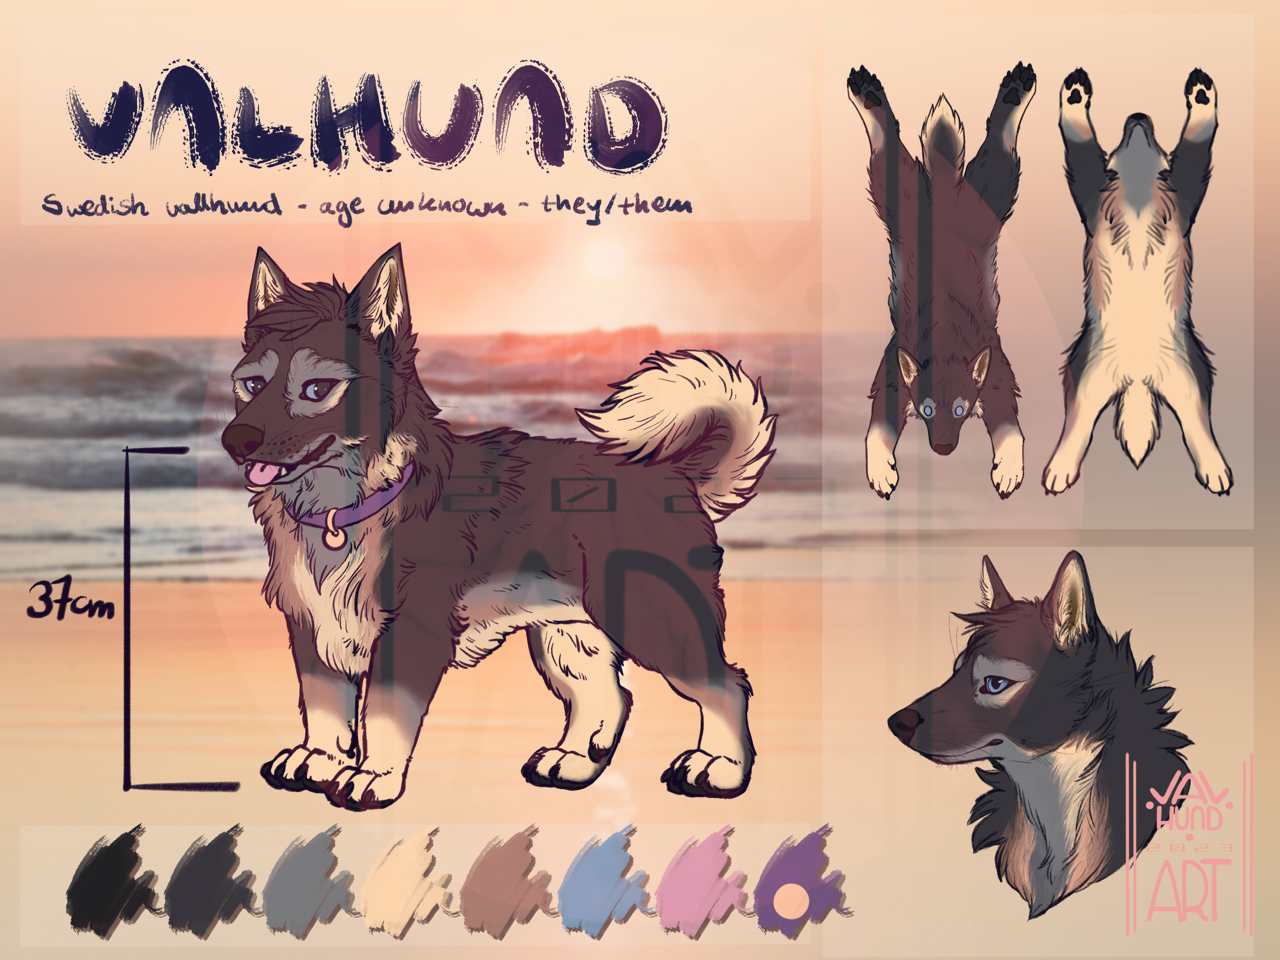 Reference sheet of a Swedish vallhund character. A small grey and cream colored dog with a personality. 